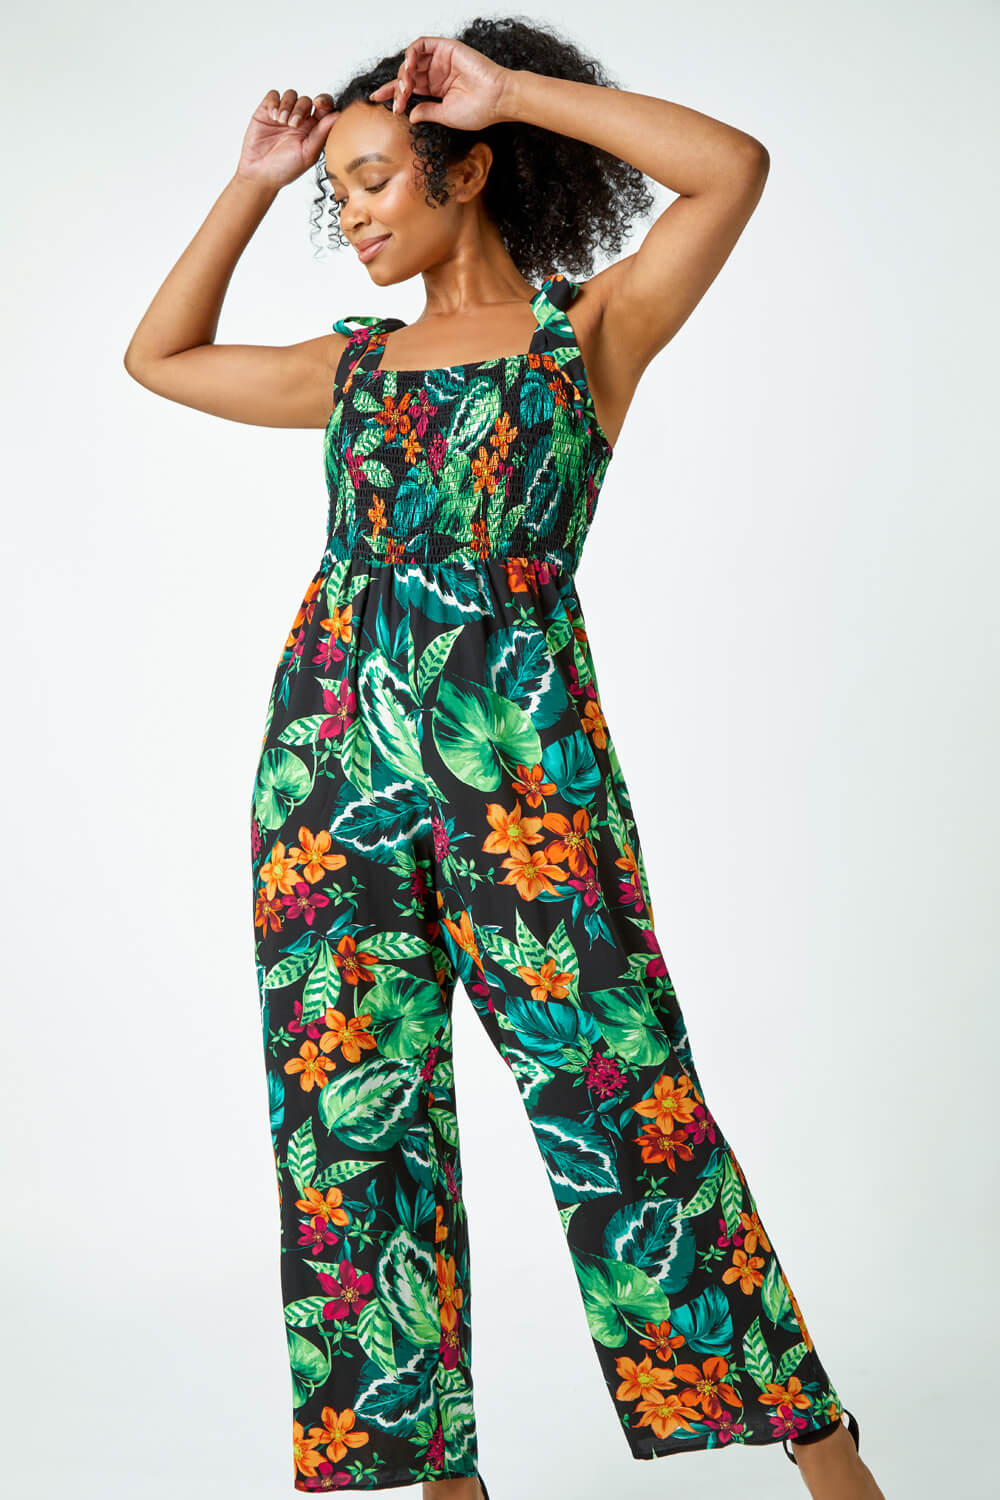 Discover more than 180 petite summer jumpsuit super hot